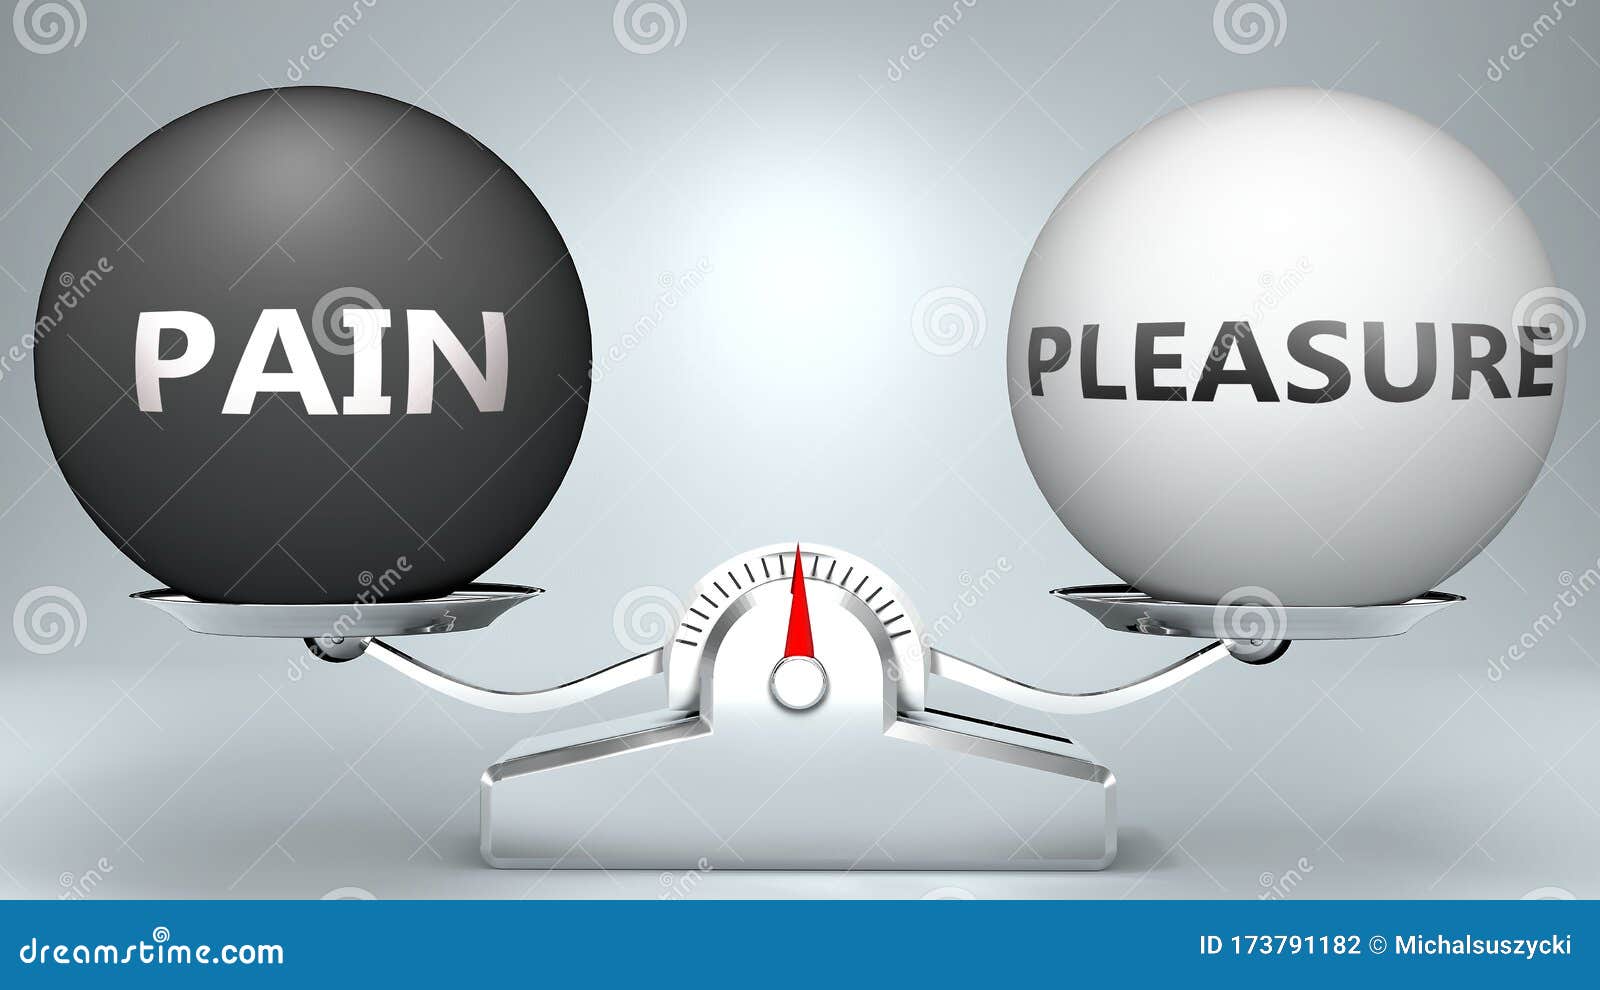 pain and pleasure in balance - pictured as a scale and words pain, pleasure - to ize desired harmony between pain and